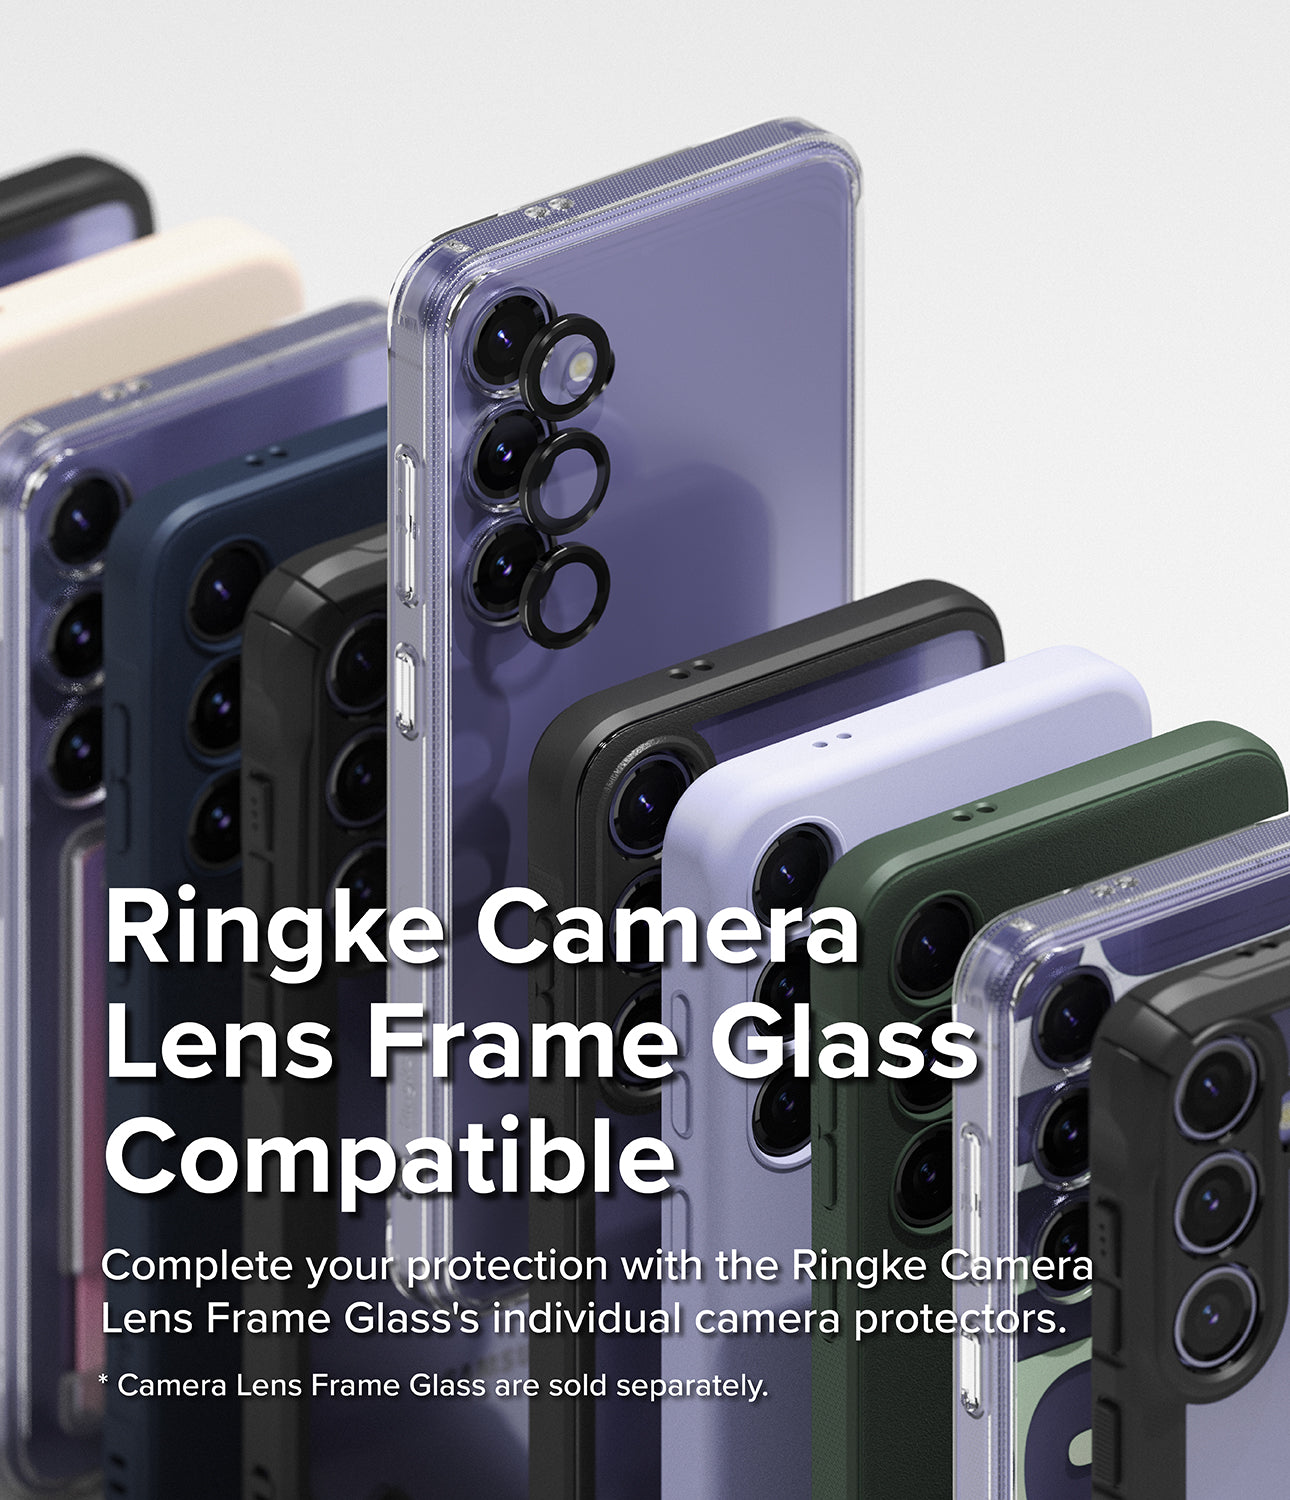 Galaxy S24 Case | Onyx - Dark Green - Ringke Camera Lens Frame Glass Compatible. Complete your protection with the Ringke Camera Lens Frame Glass' individual camera protectors.